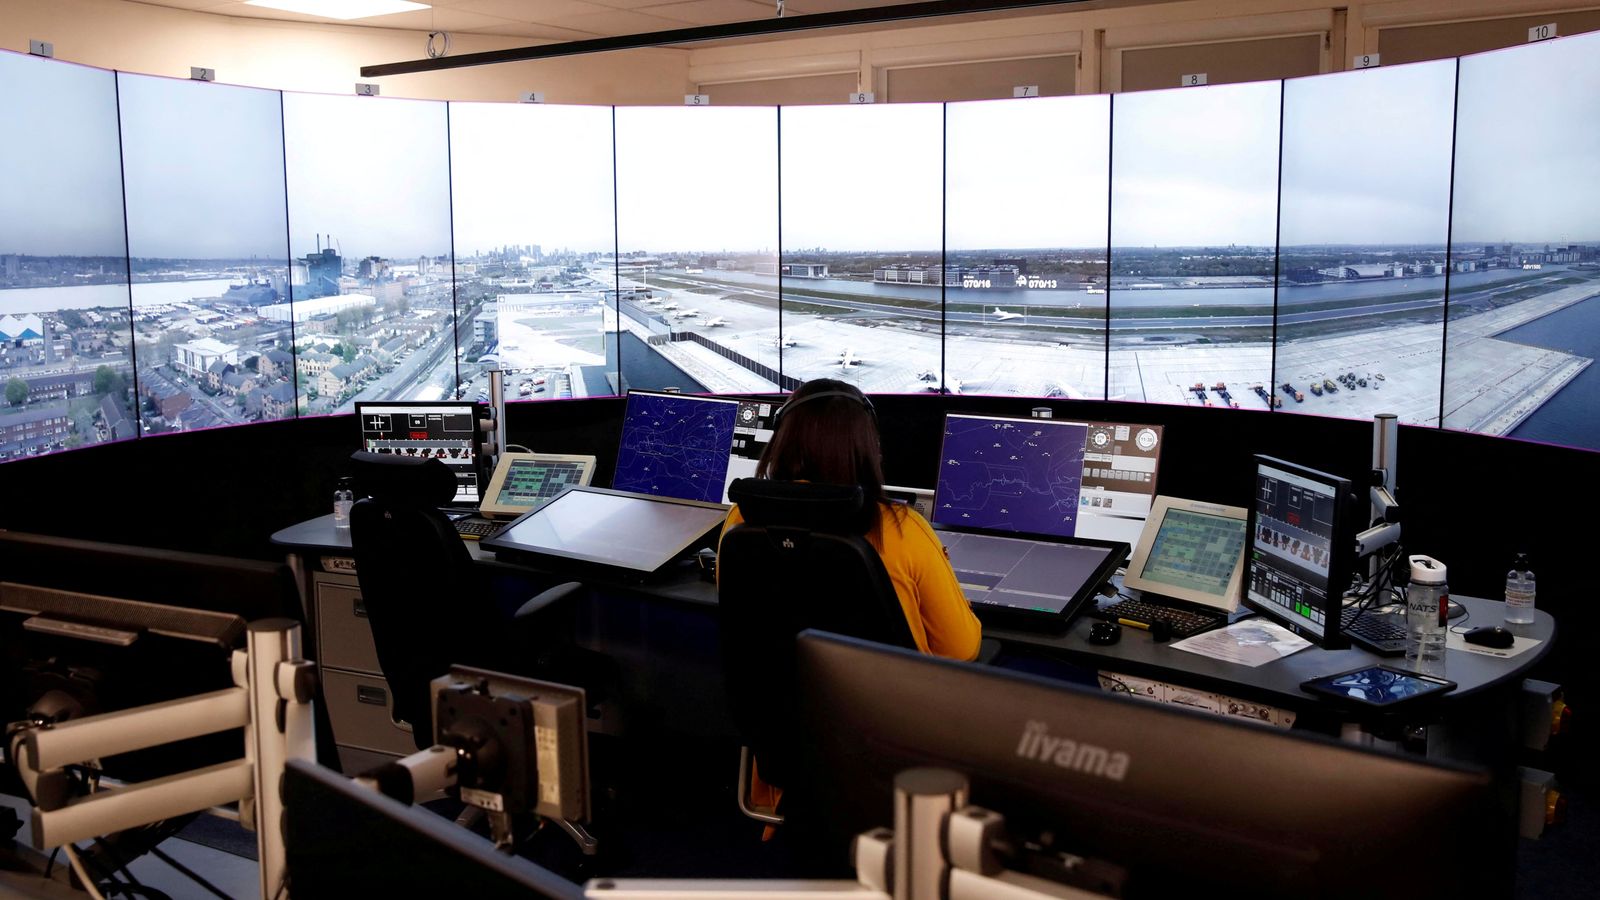 Air fares poised to increase as amount planes pay to fund air traffic control rises